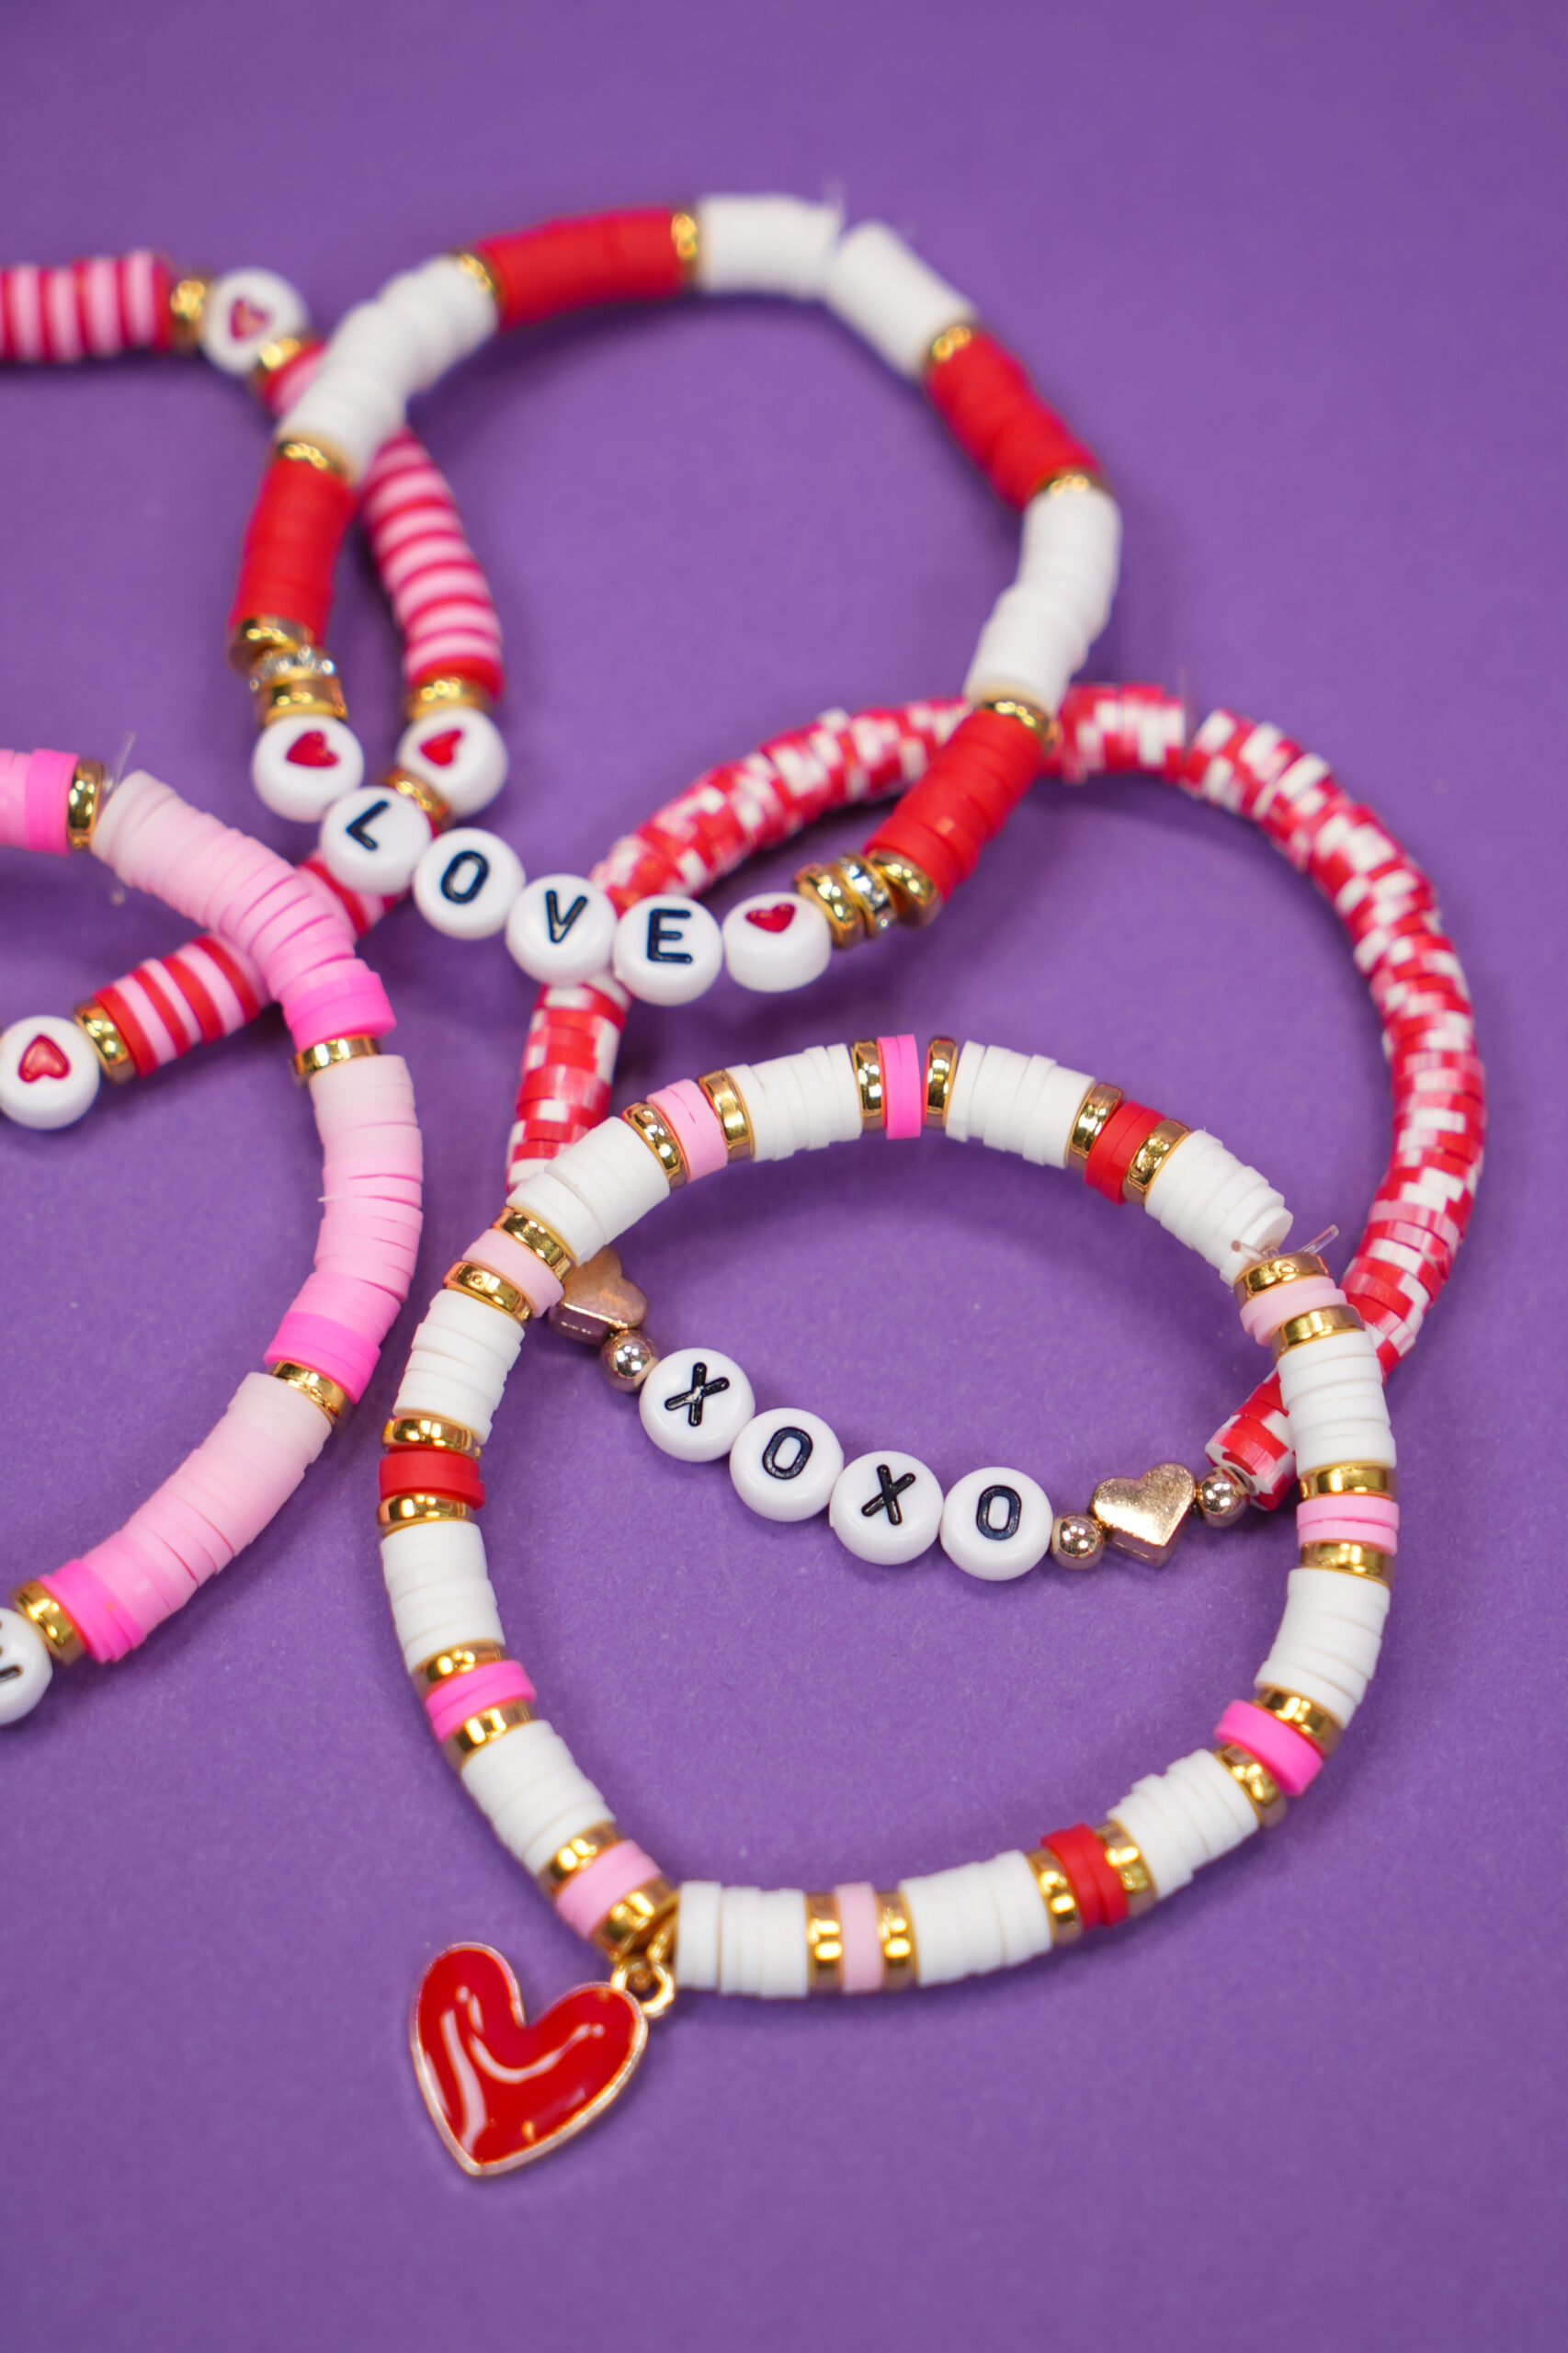 Stacked clay bead bracelets with Valentine's Day colors and theme on purple background